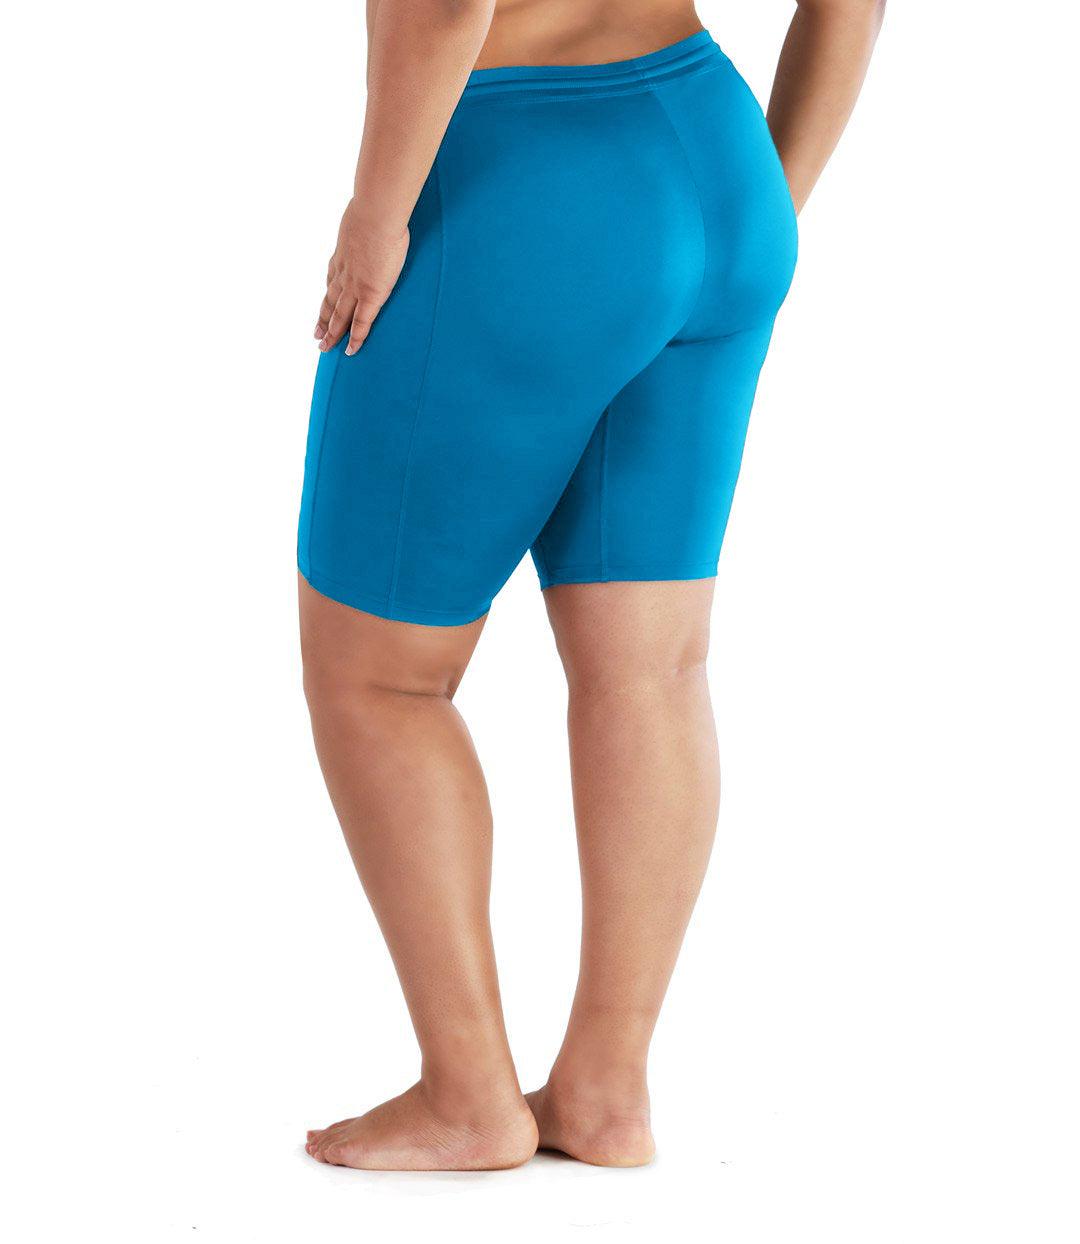 QuikEnergy Fitted Swim Short Turquoise - FINAL SALE